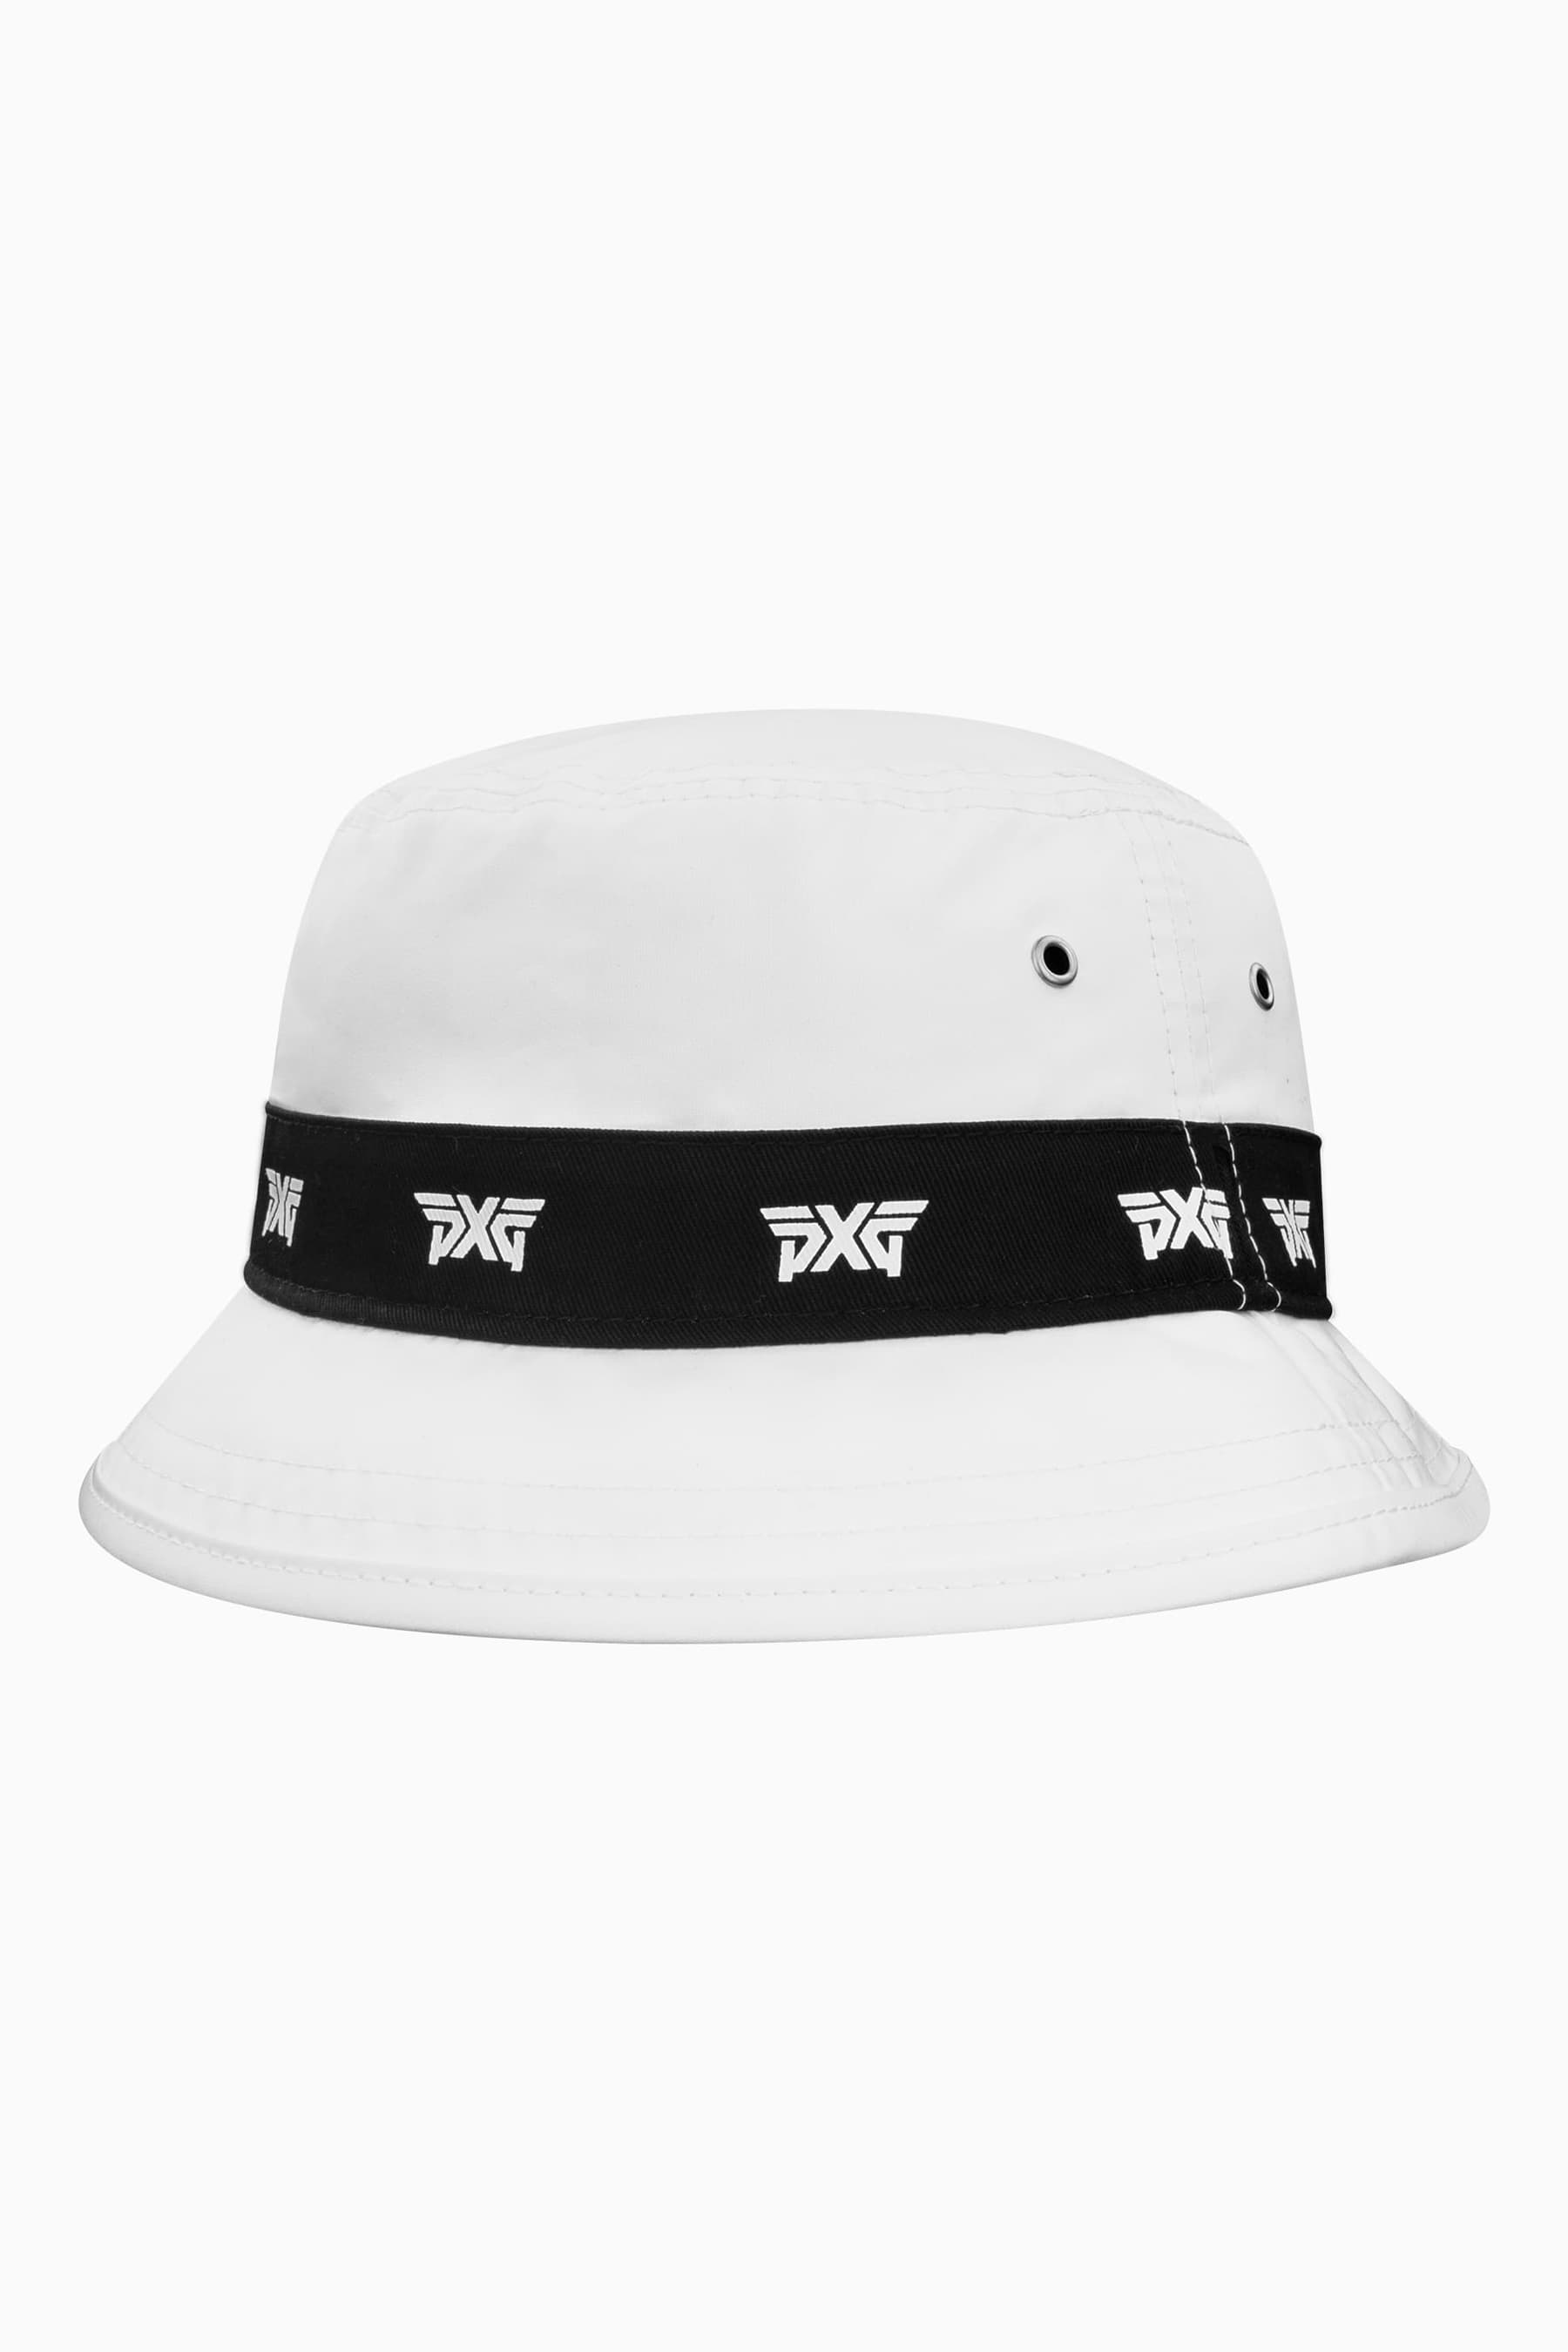 Logo Repeat Bucket Hat | Quality and Highest Accessories Apparel, Golf Gear, Golf PXG at Clubs the Shop